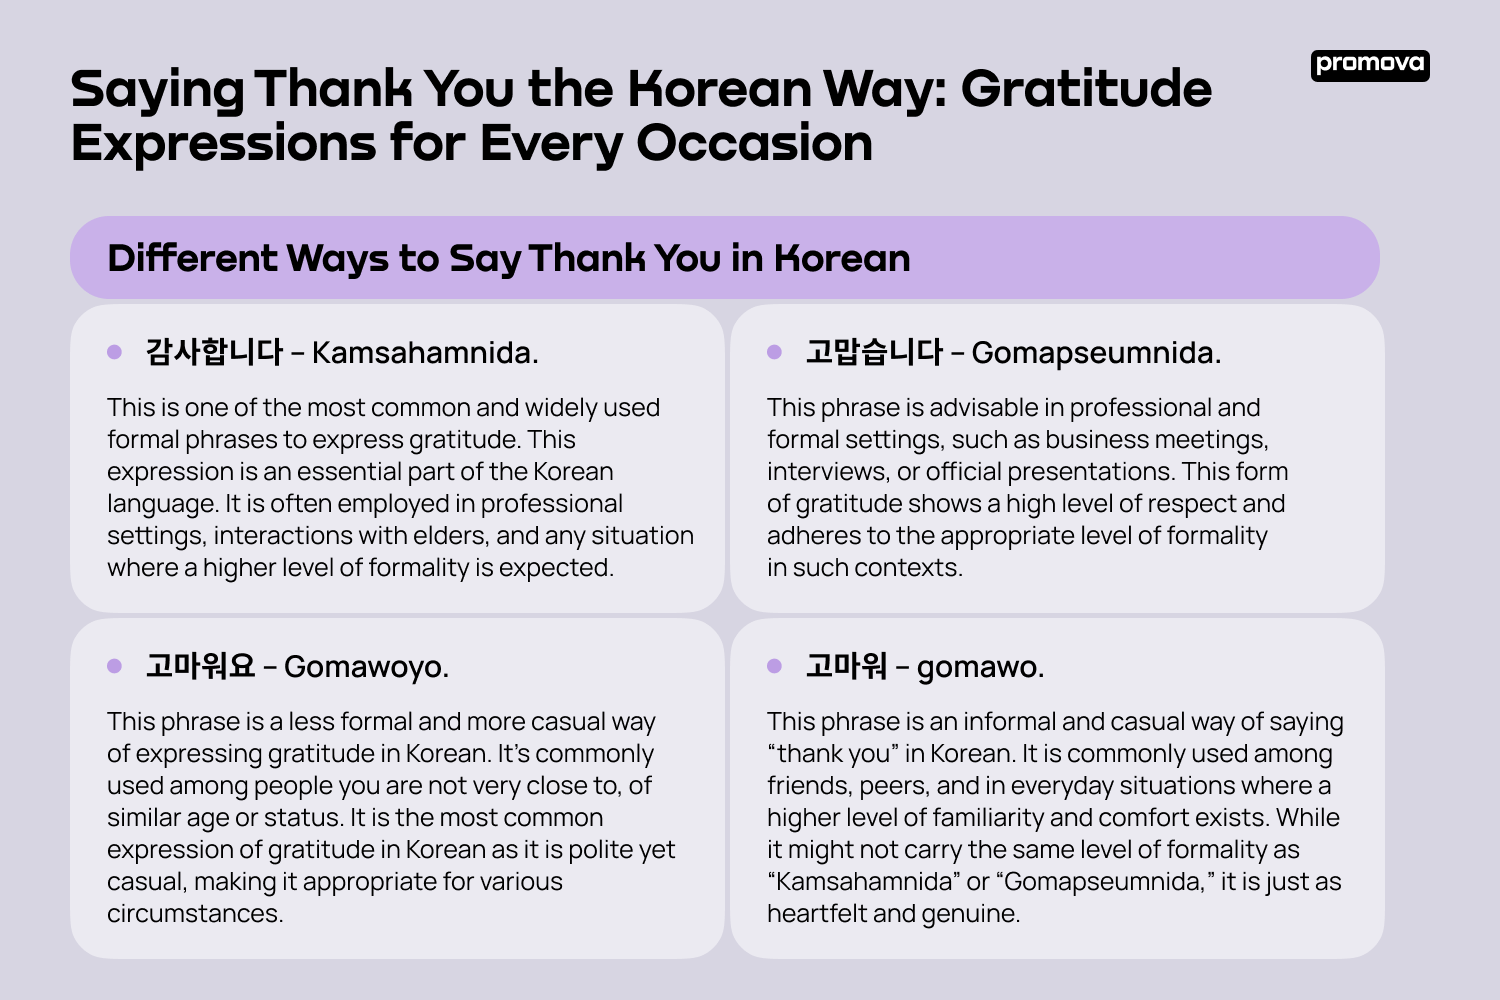 Different Ways to Say Thank You in Korean